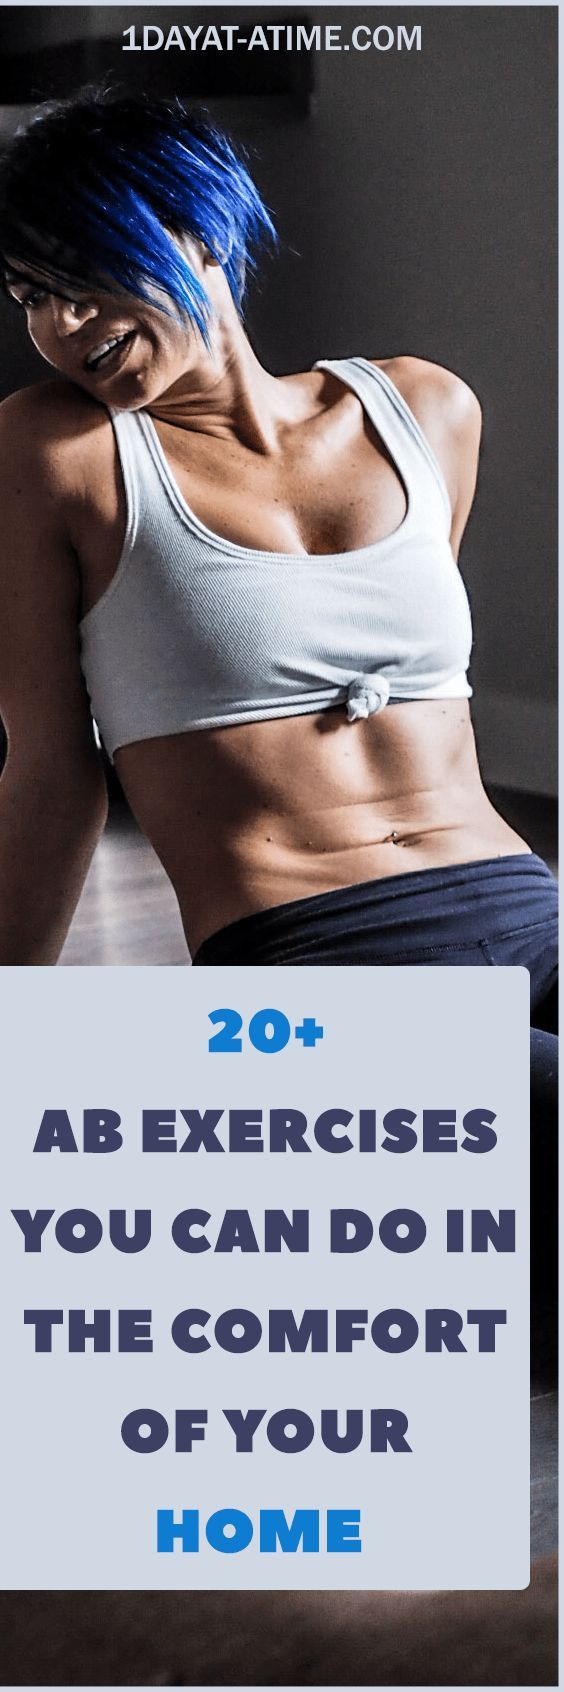 Get #6PackAbsAtHome with these #AbWorkoutVideos and #FitnessTips on 1dayat-atime...